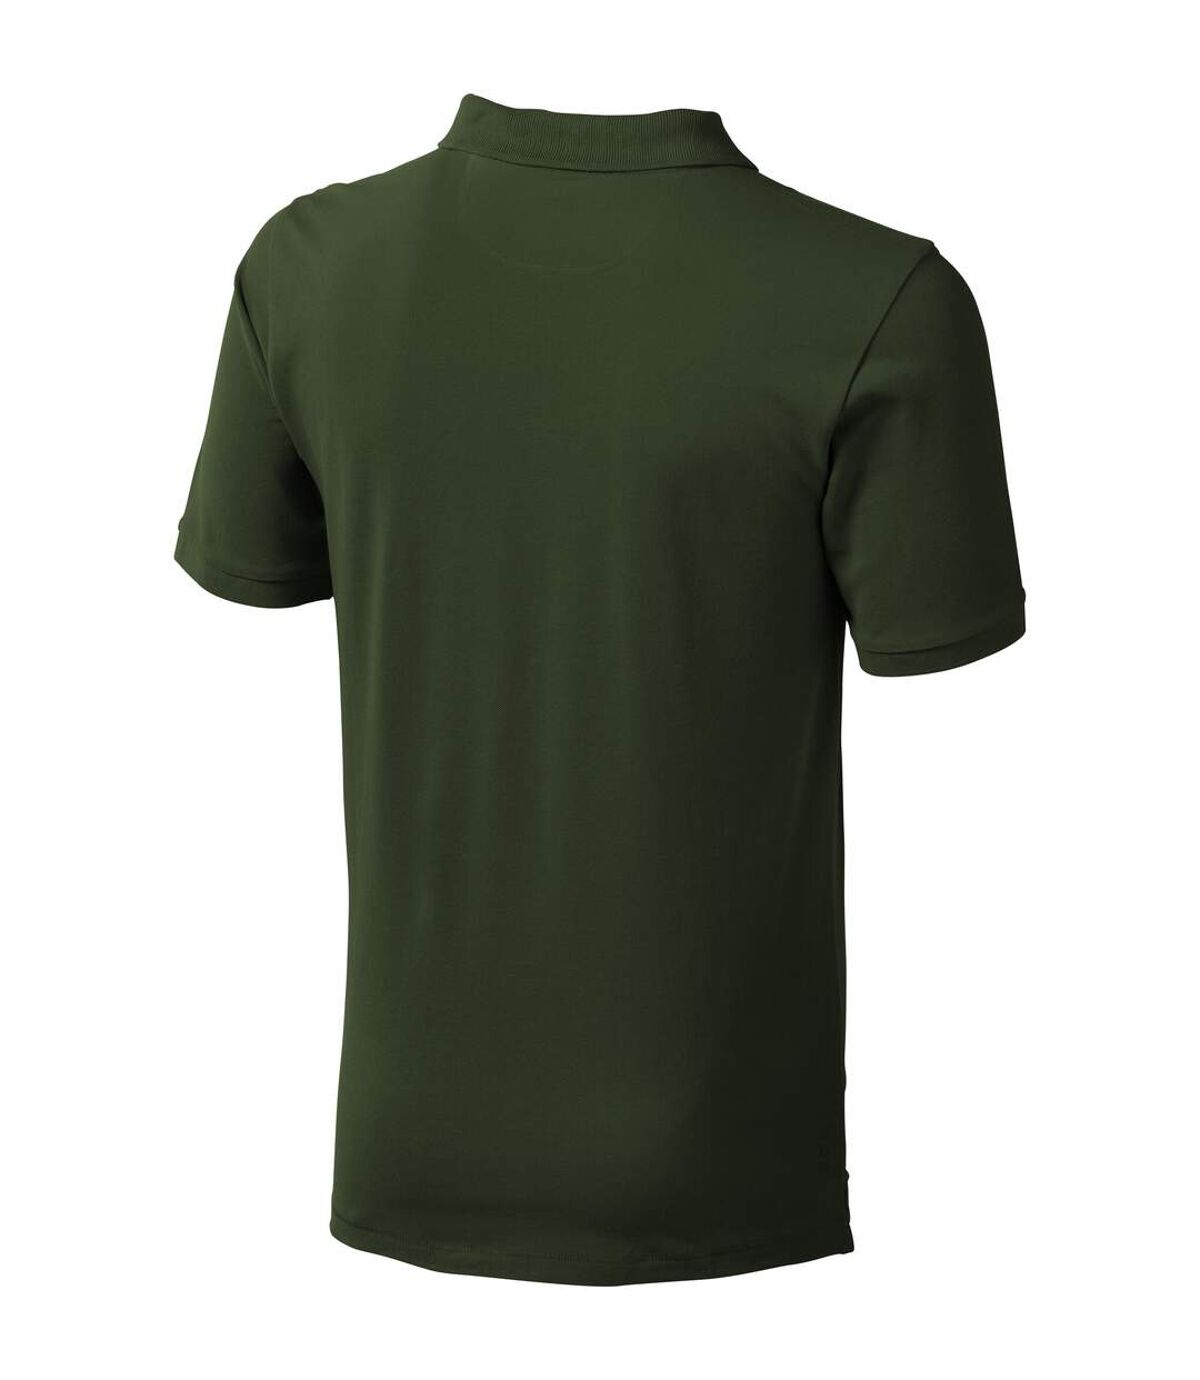 Elevate - Polo manches courtes Calgary - Homme (Vert militaire) - UTPF1816